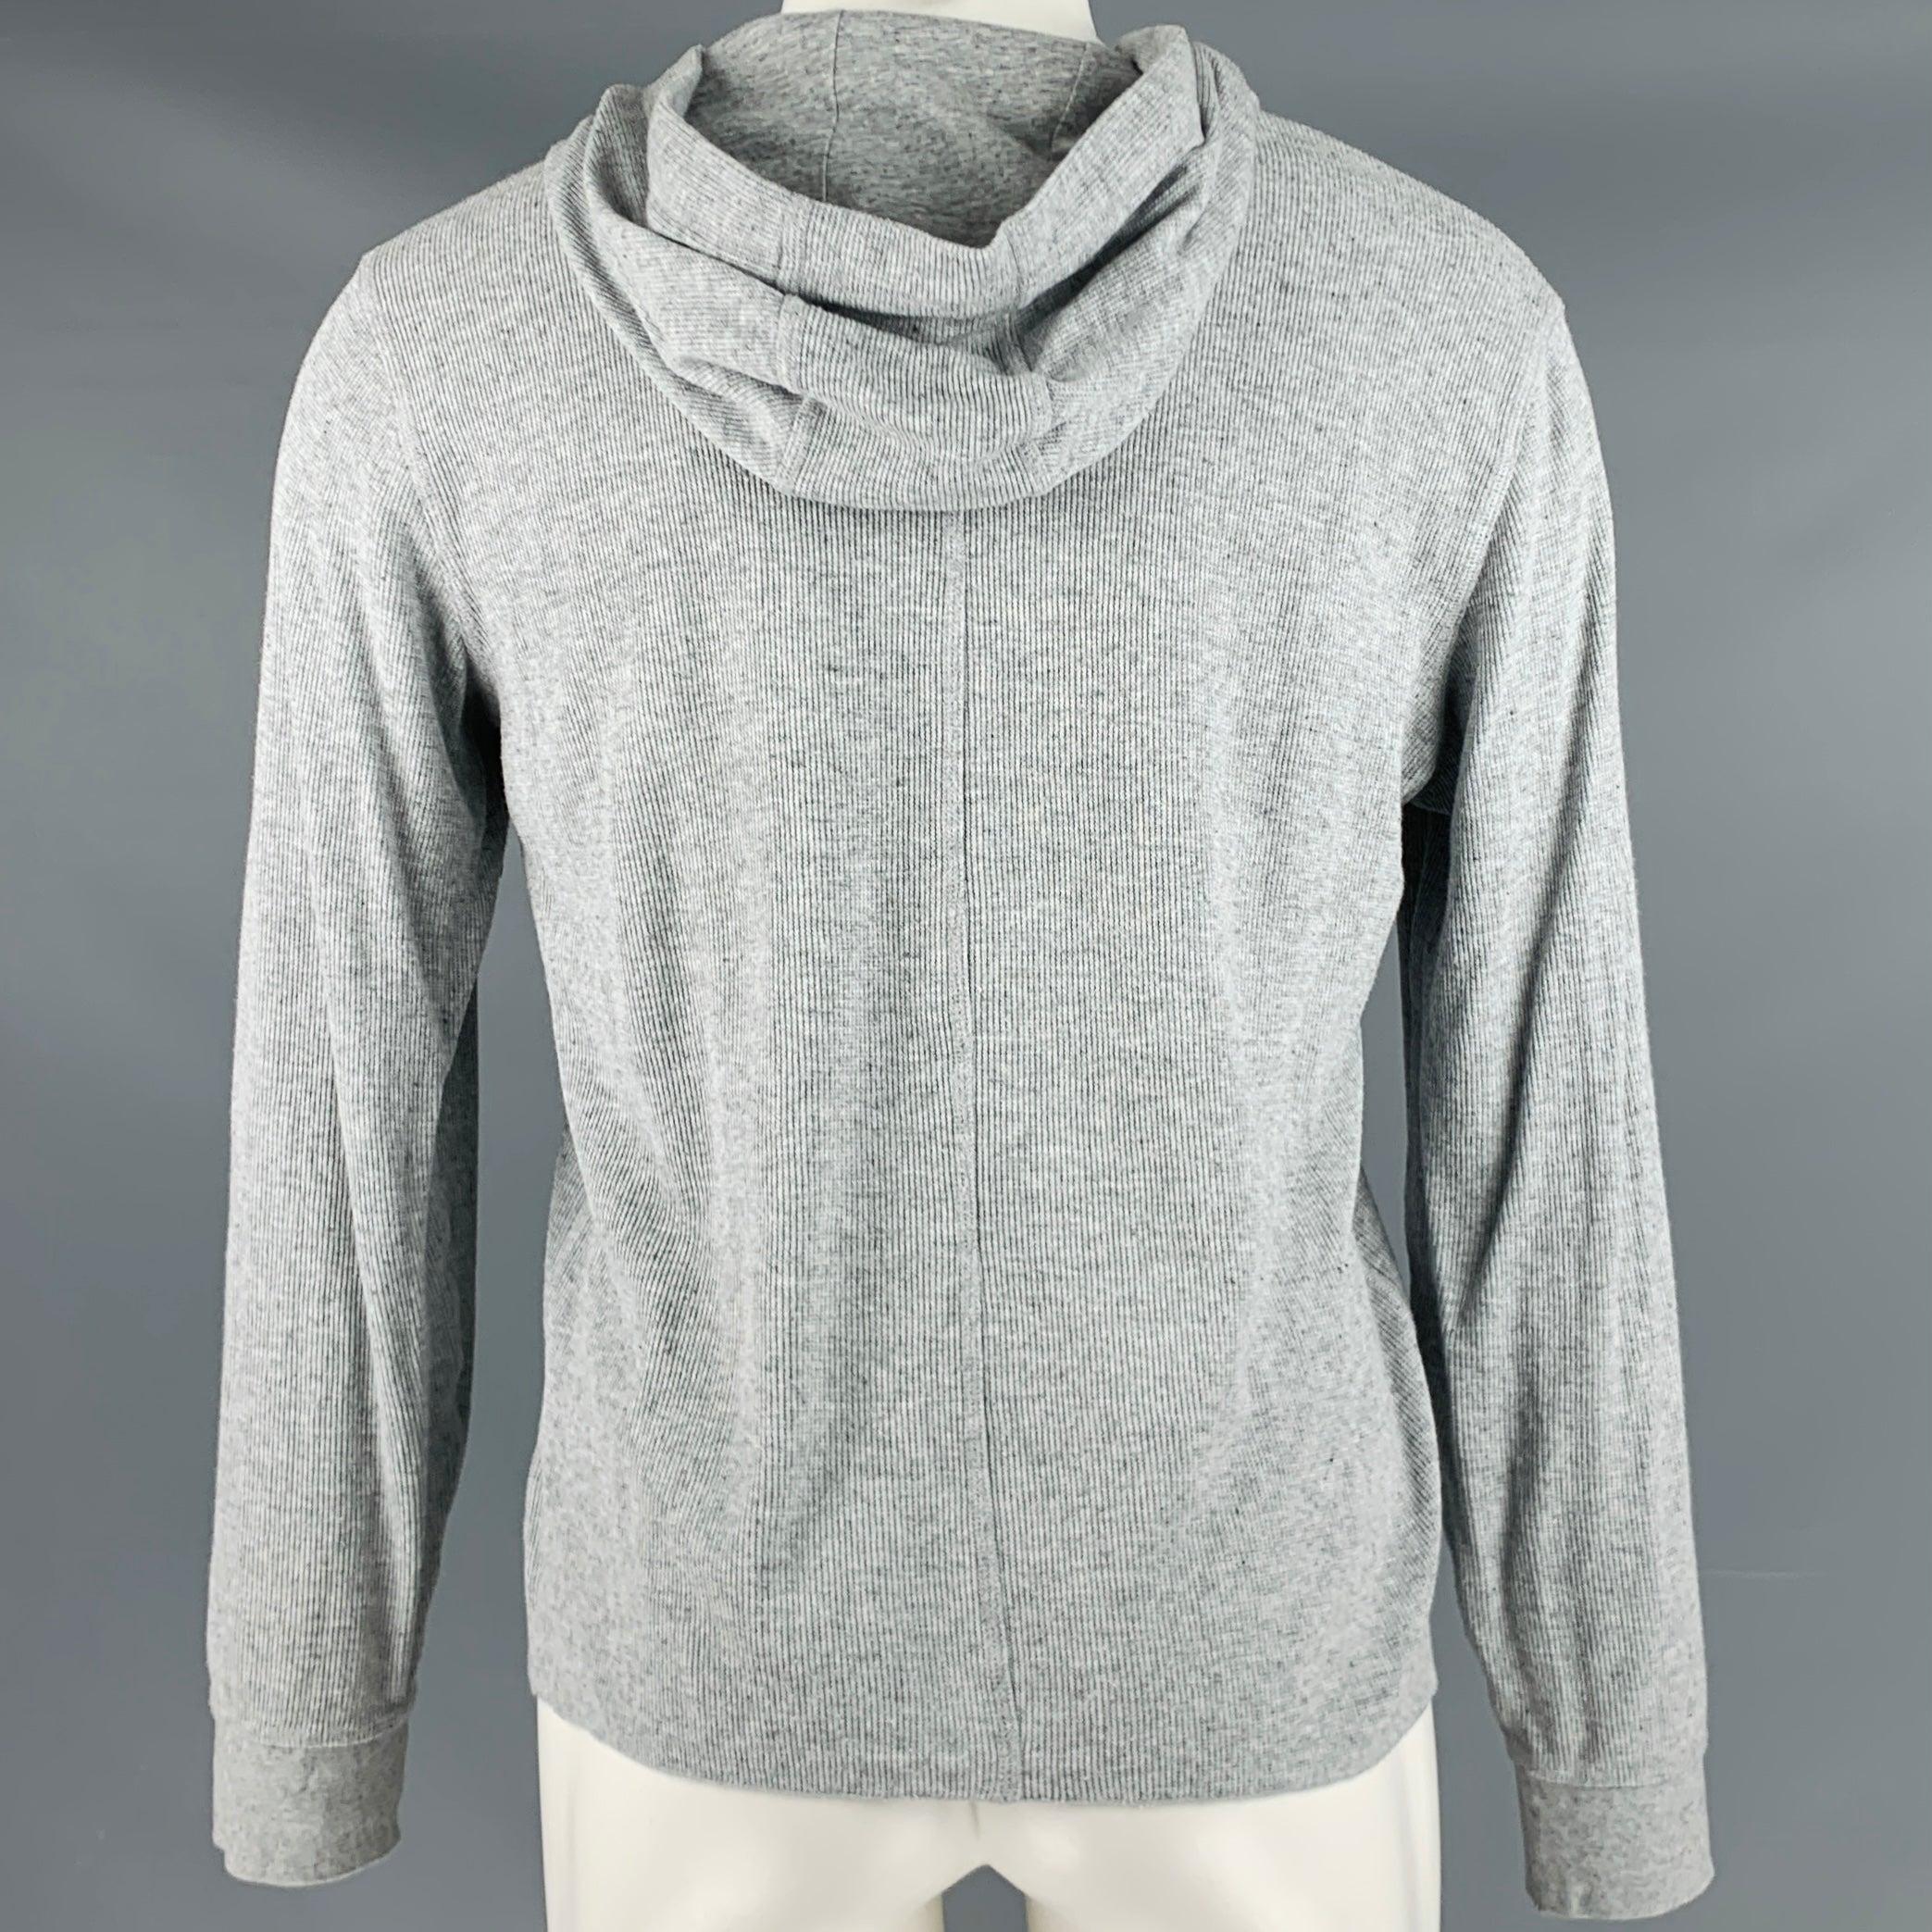 VINCE Size S Grey Textured Cotton Blend Hoodie Sweatshirt In Excellent Condition For Sale In San Francisco, CA